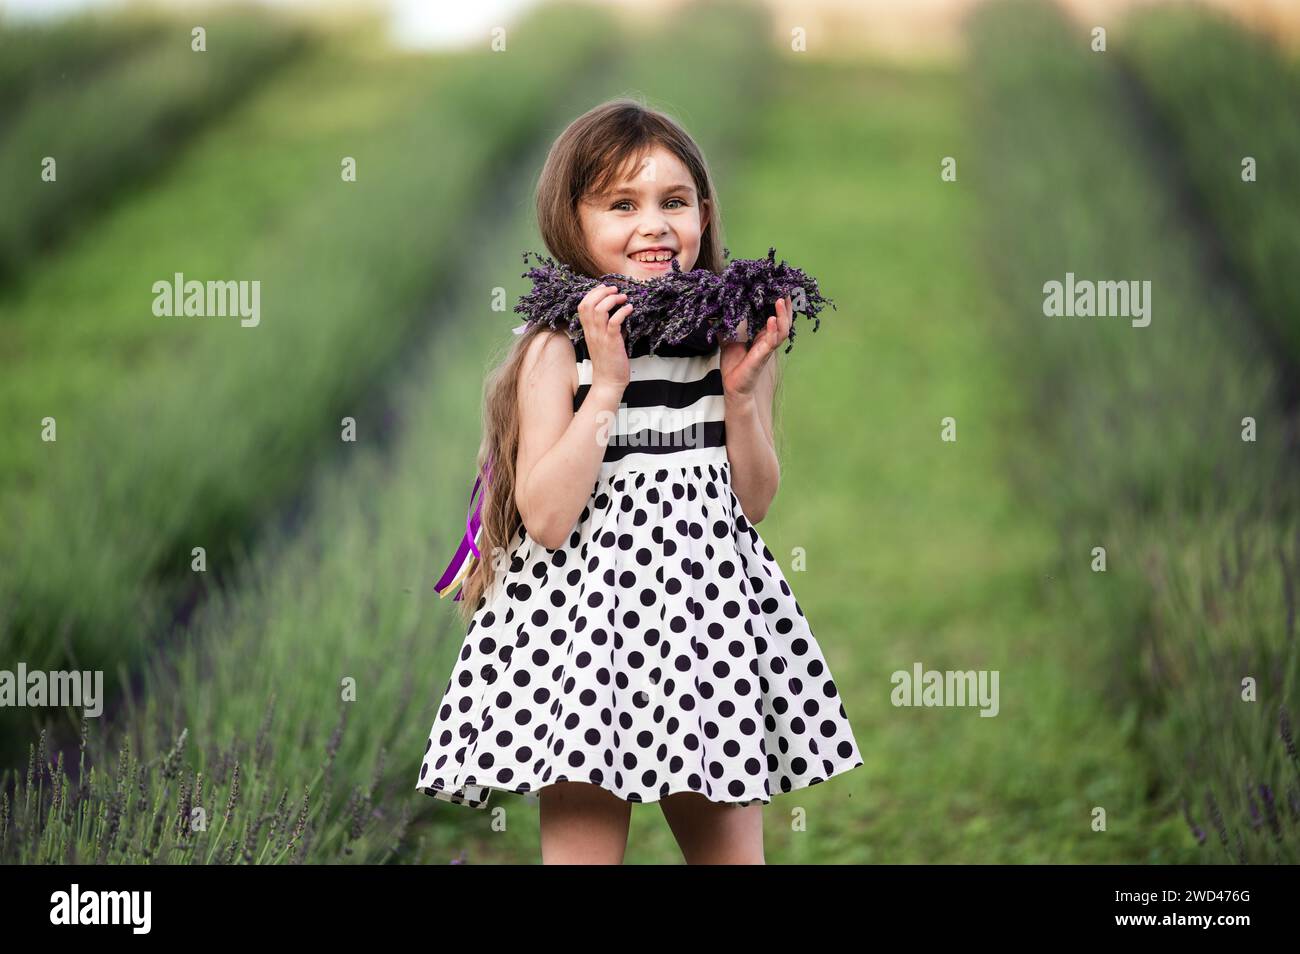 cute little girl smiling and fixing her crown that fell off her head, walking in a lavender field. Stock Photo